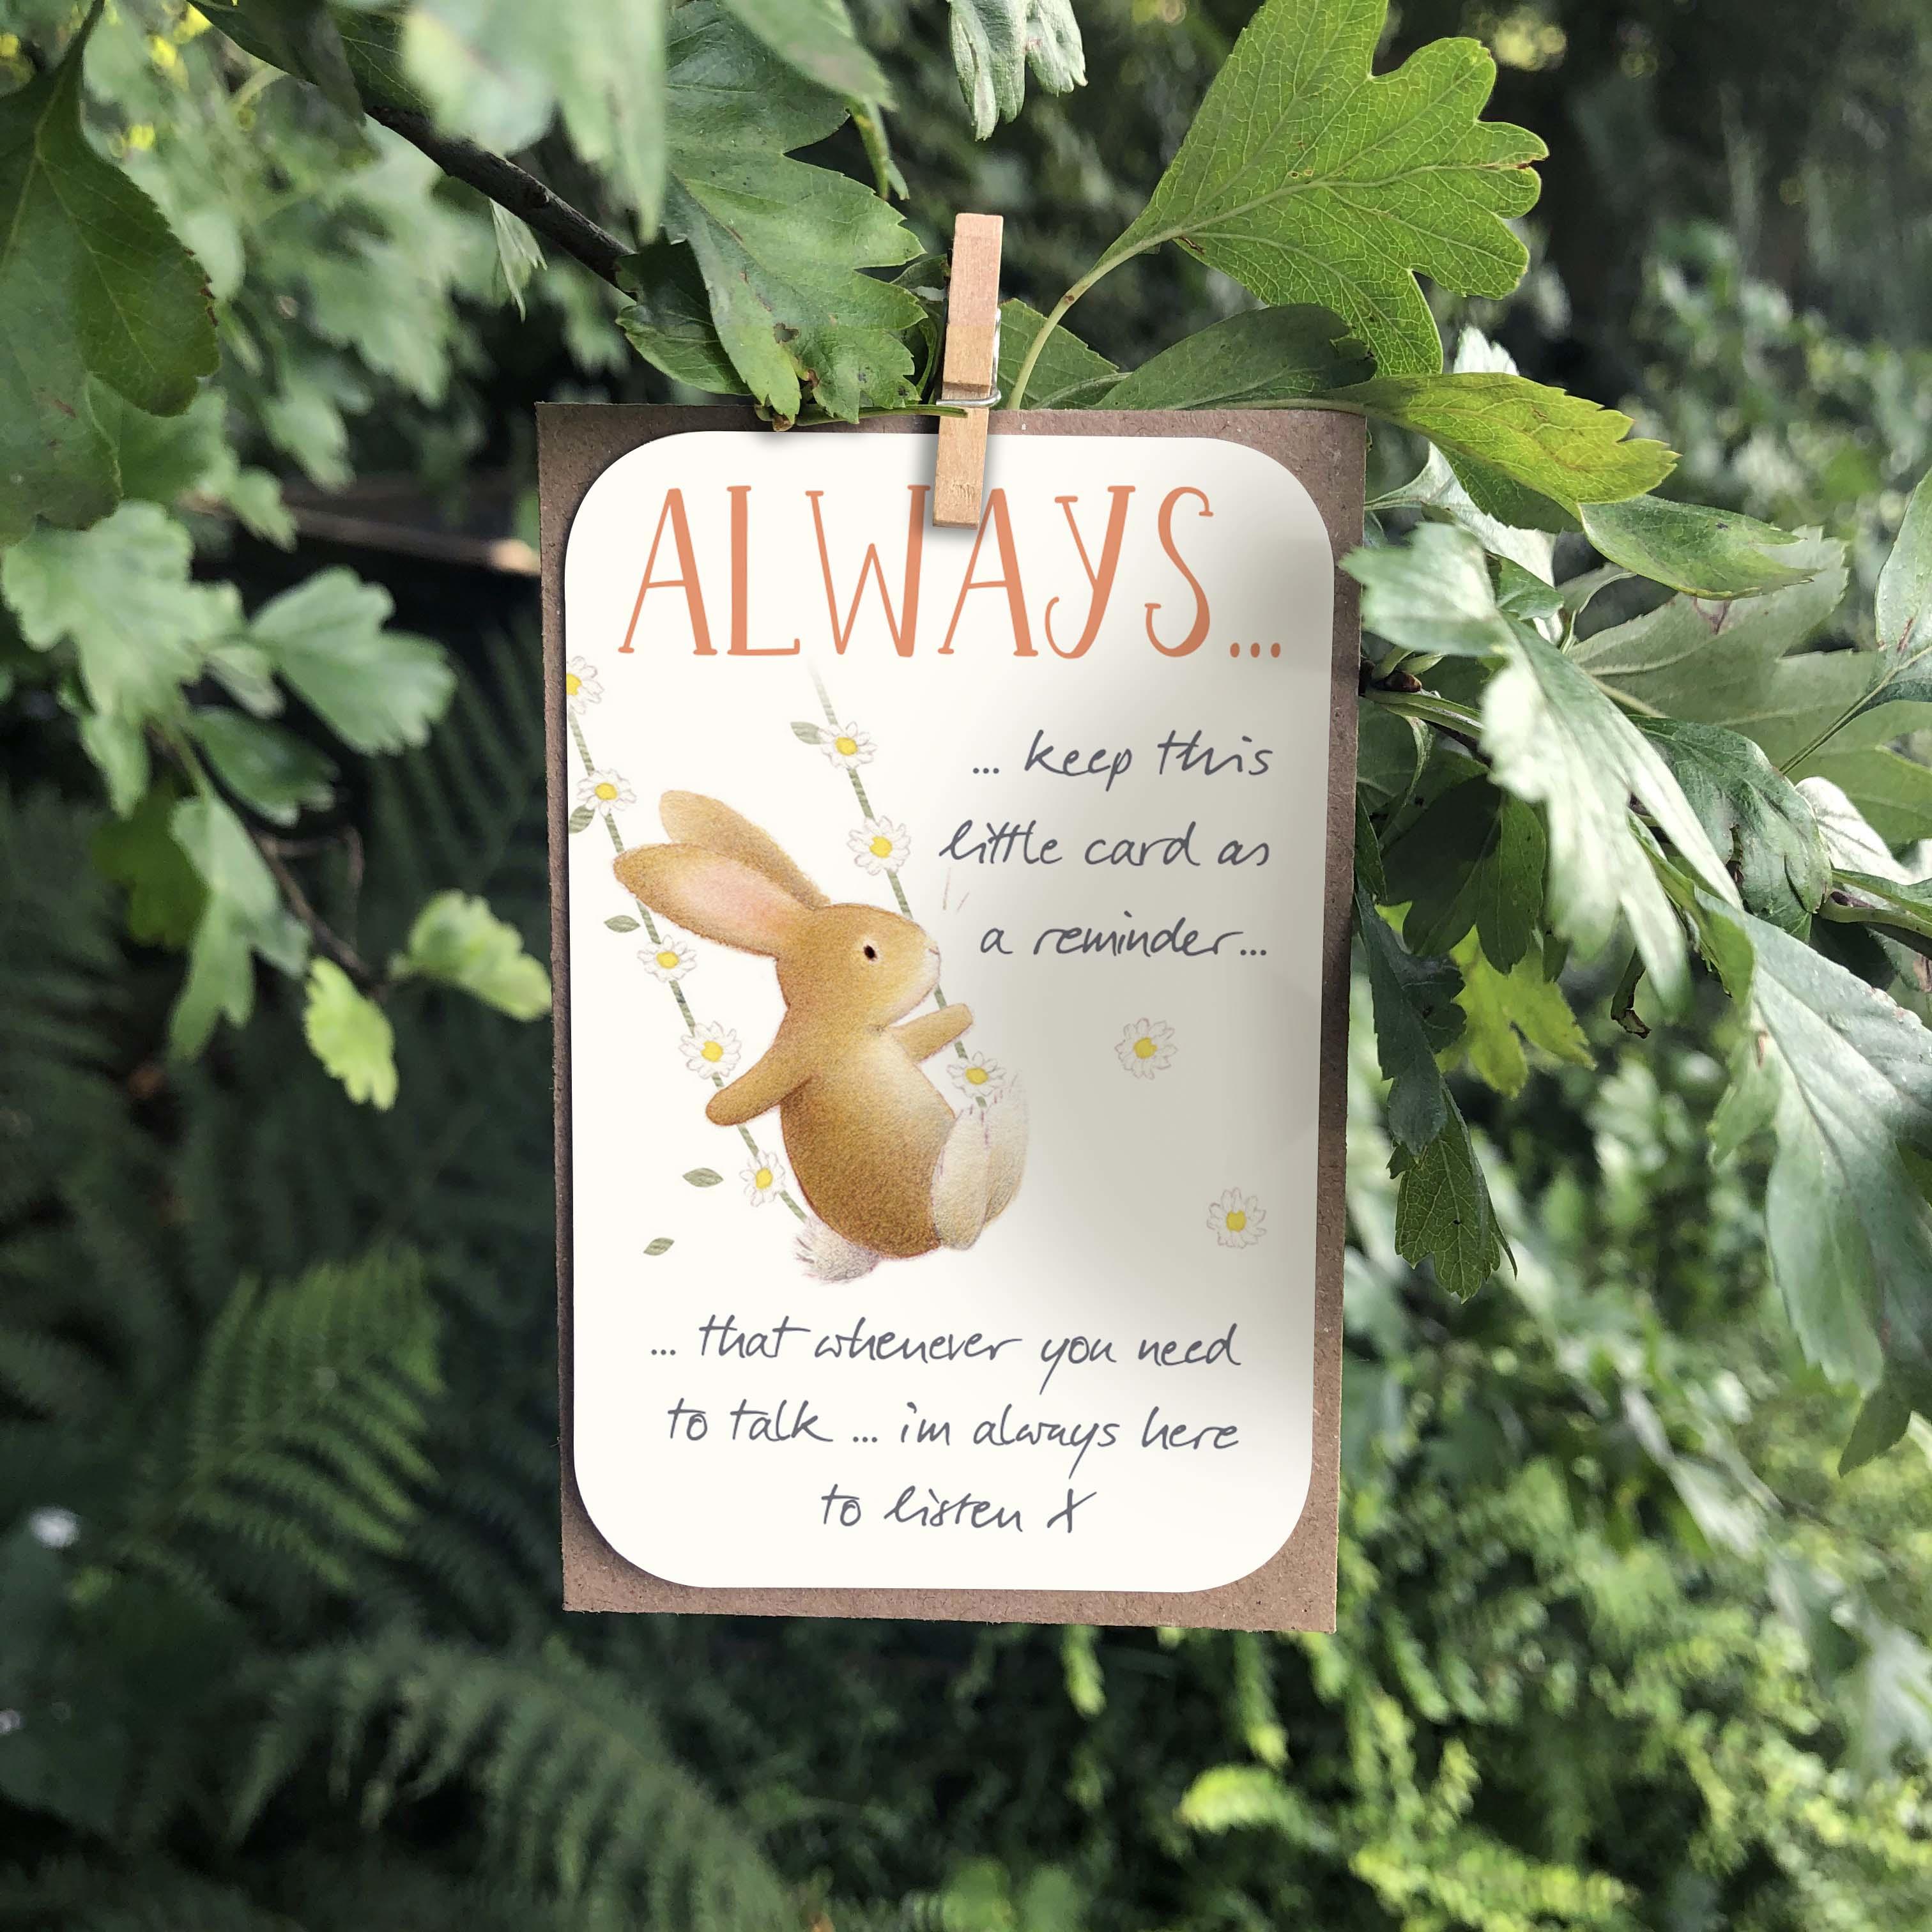 A small keepsake card with an “Always here to listen” caption and a positive little message. Features a cute rabbit on a daisy swing illustration.